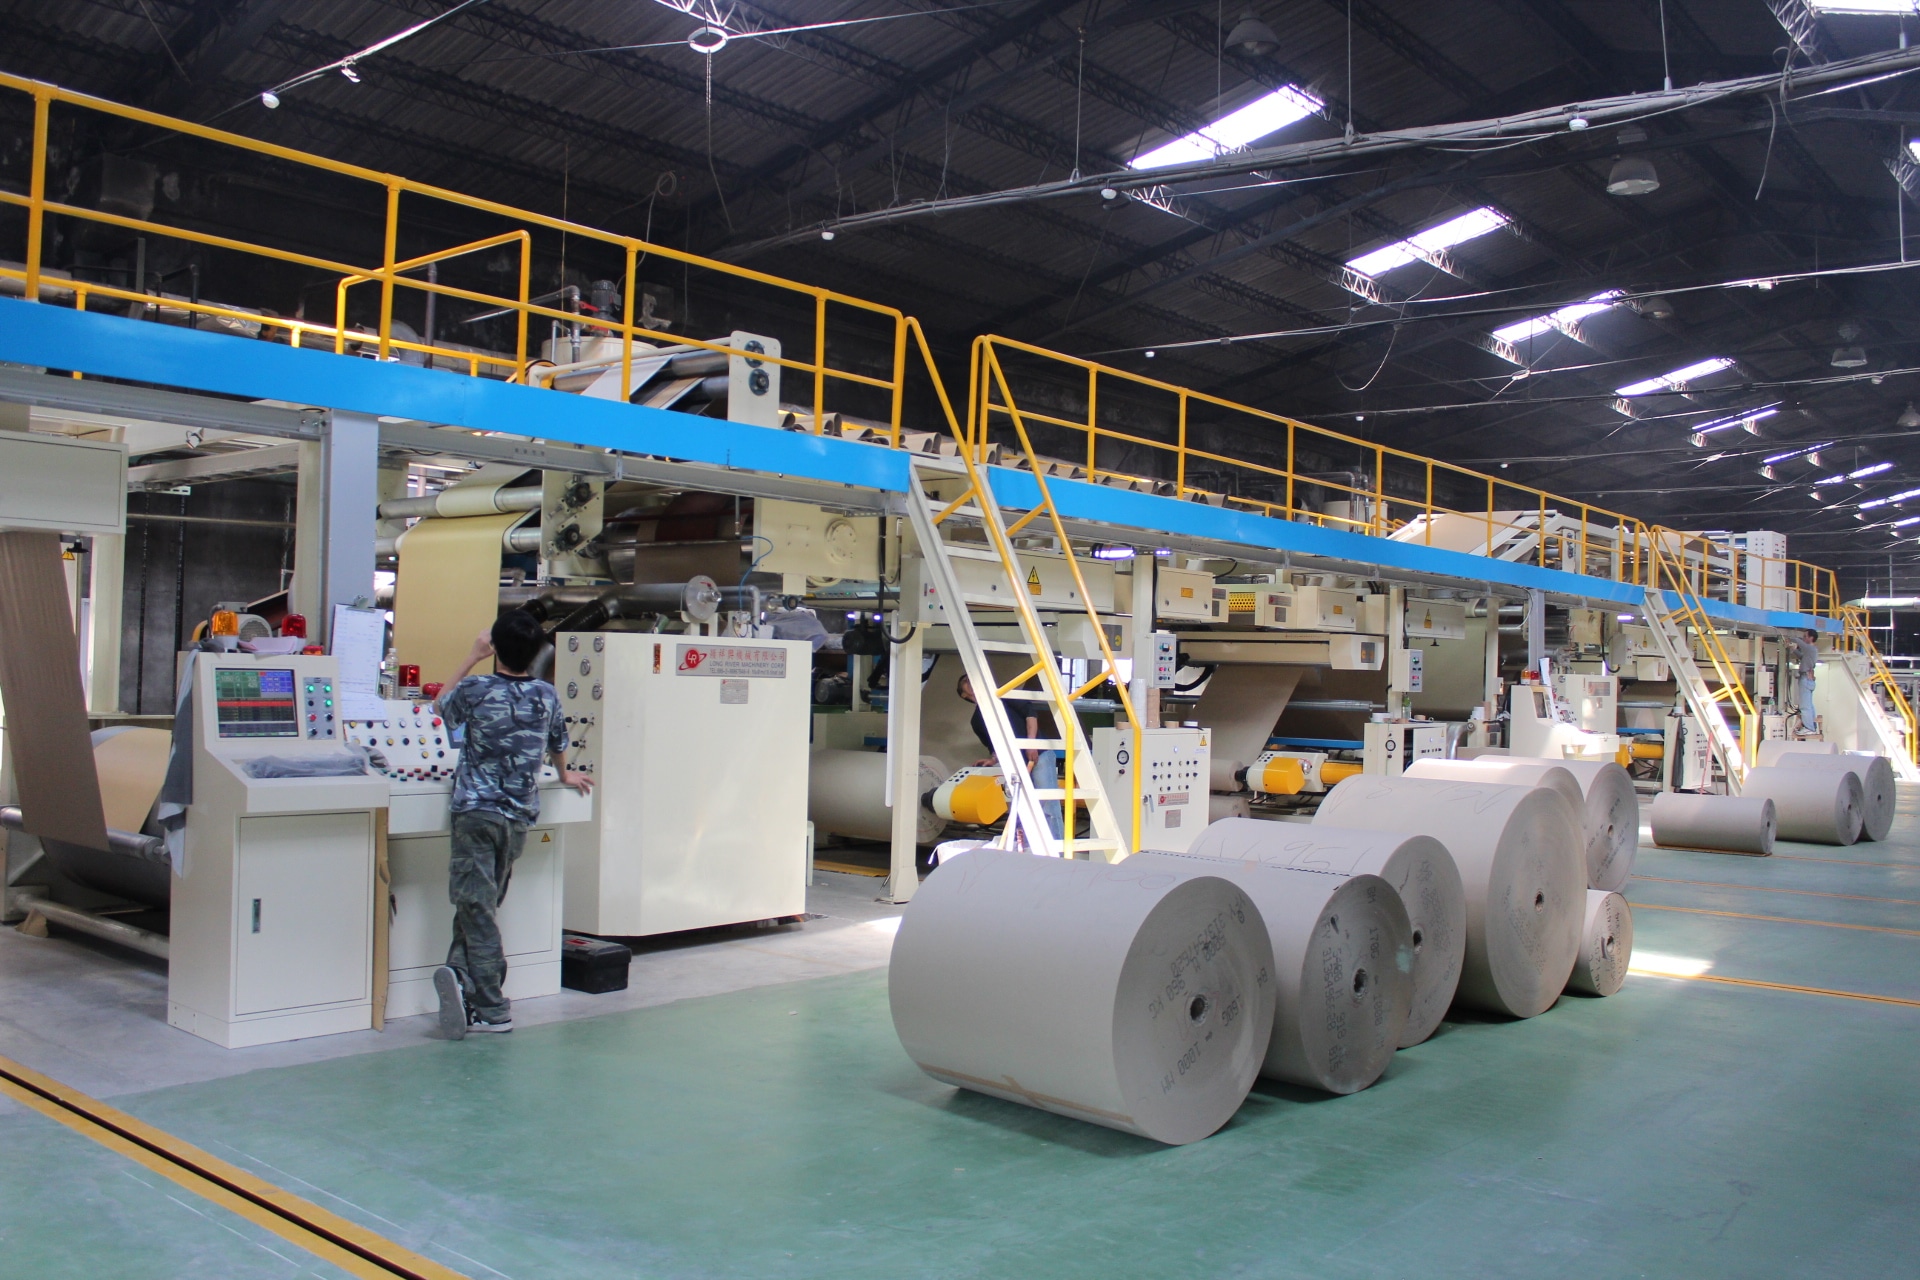 Corrugator Wet End under production running coniditions